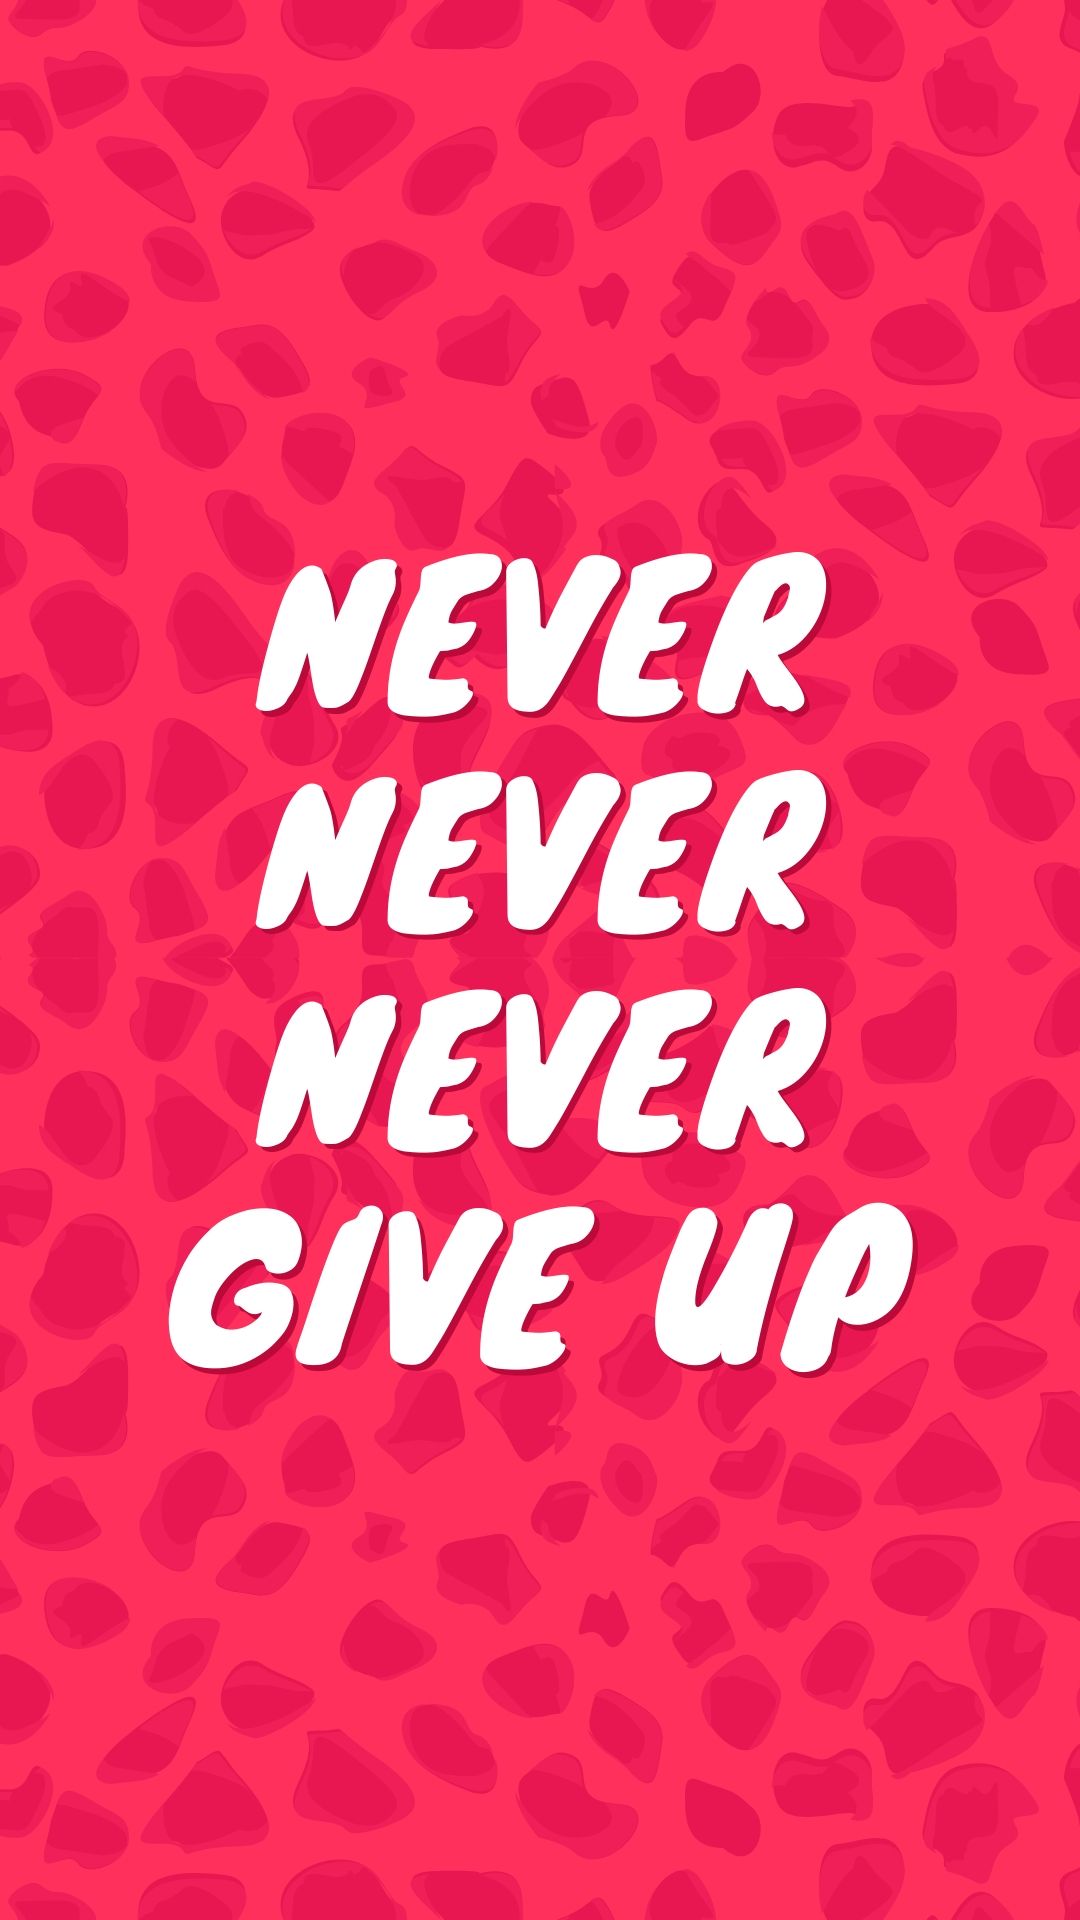 Never, Never, Never give up blog inspiration and cell phone wallpaper